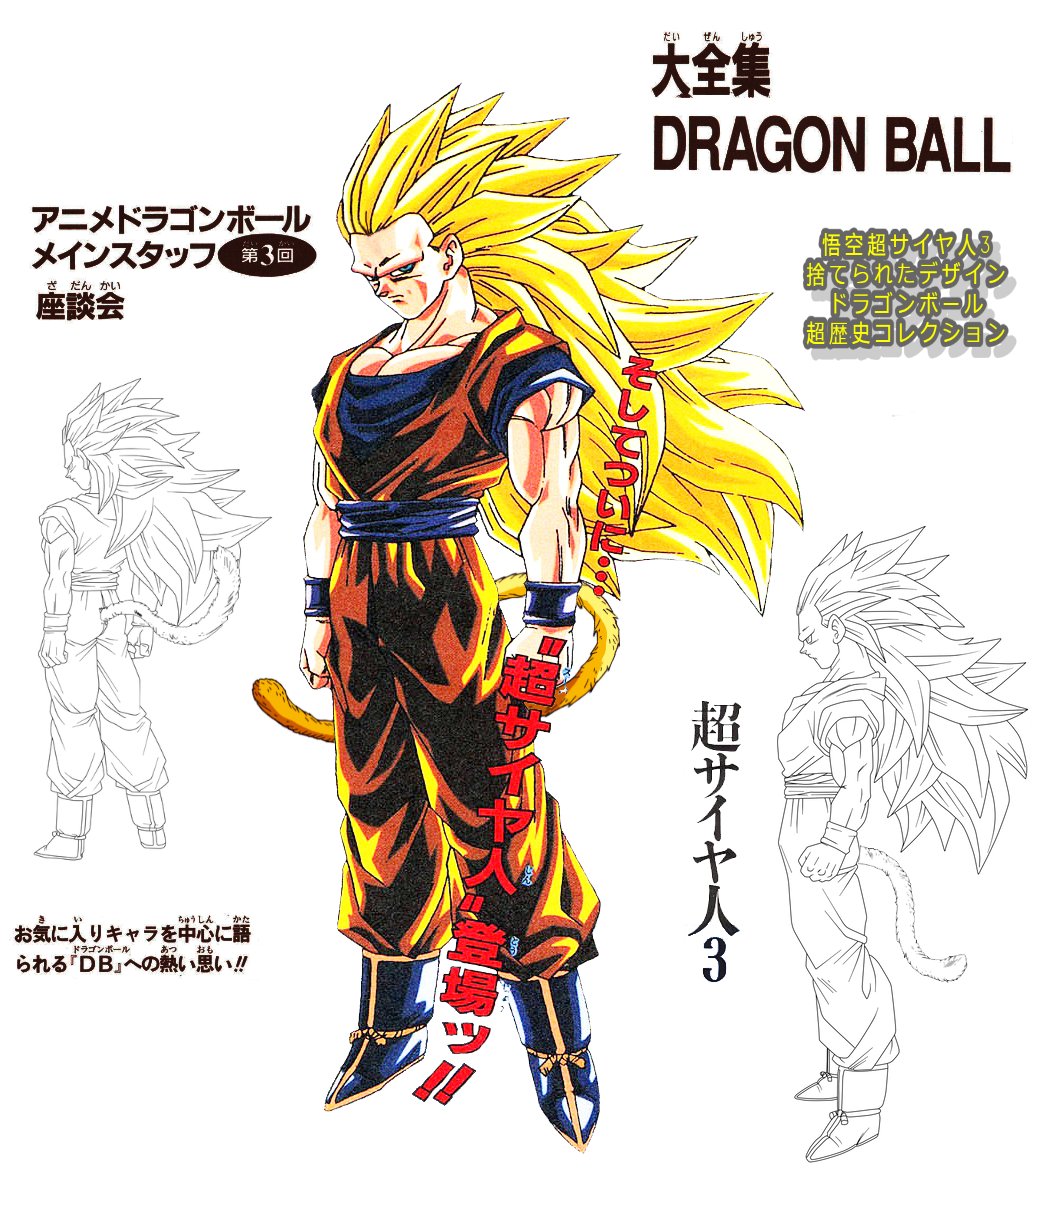 SLO on X: This Super Saiyan 3 w tail concept art is fucking awesome bro  t.cop8AzeChonx  X